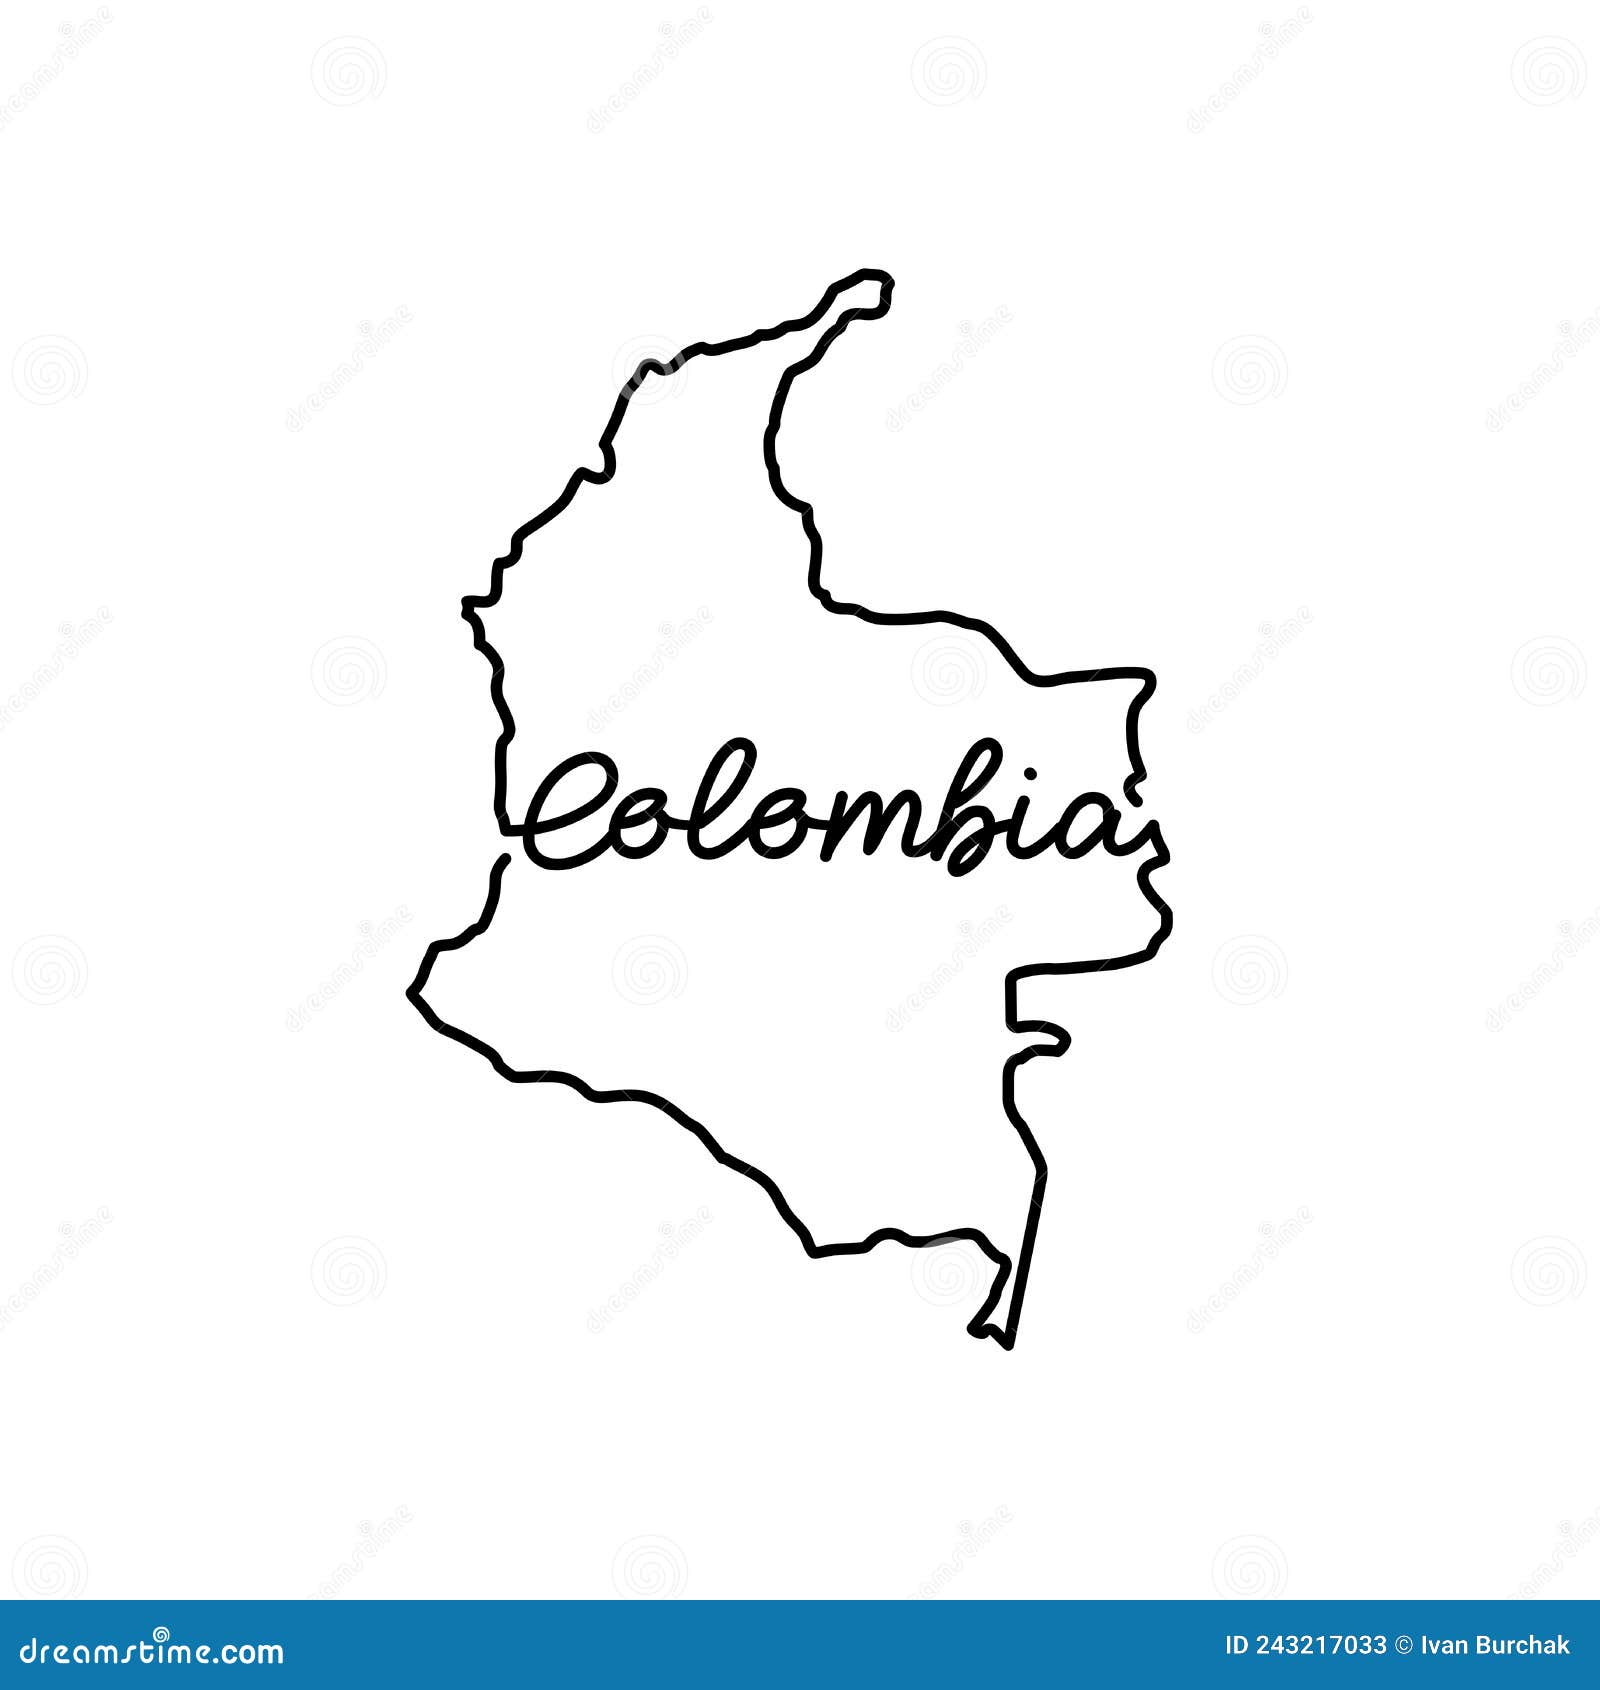 Colombia Outline Map Royalty Free Stock Photo 4360485